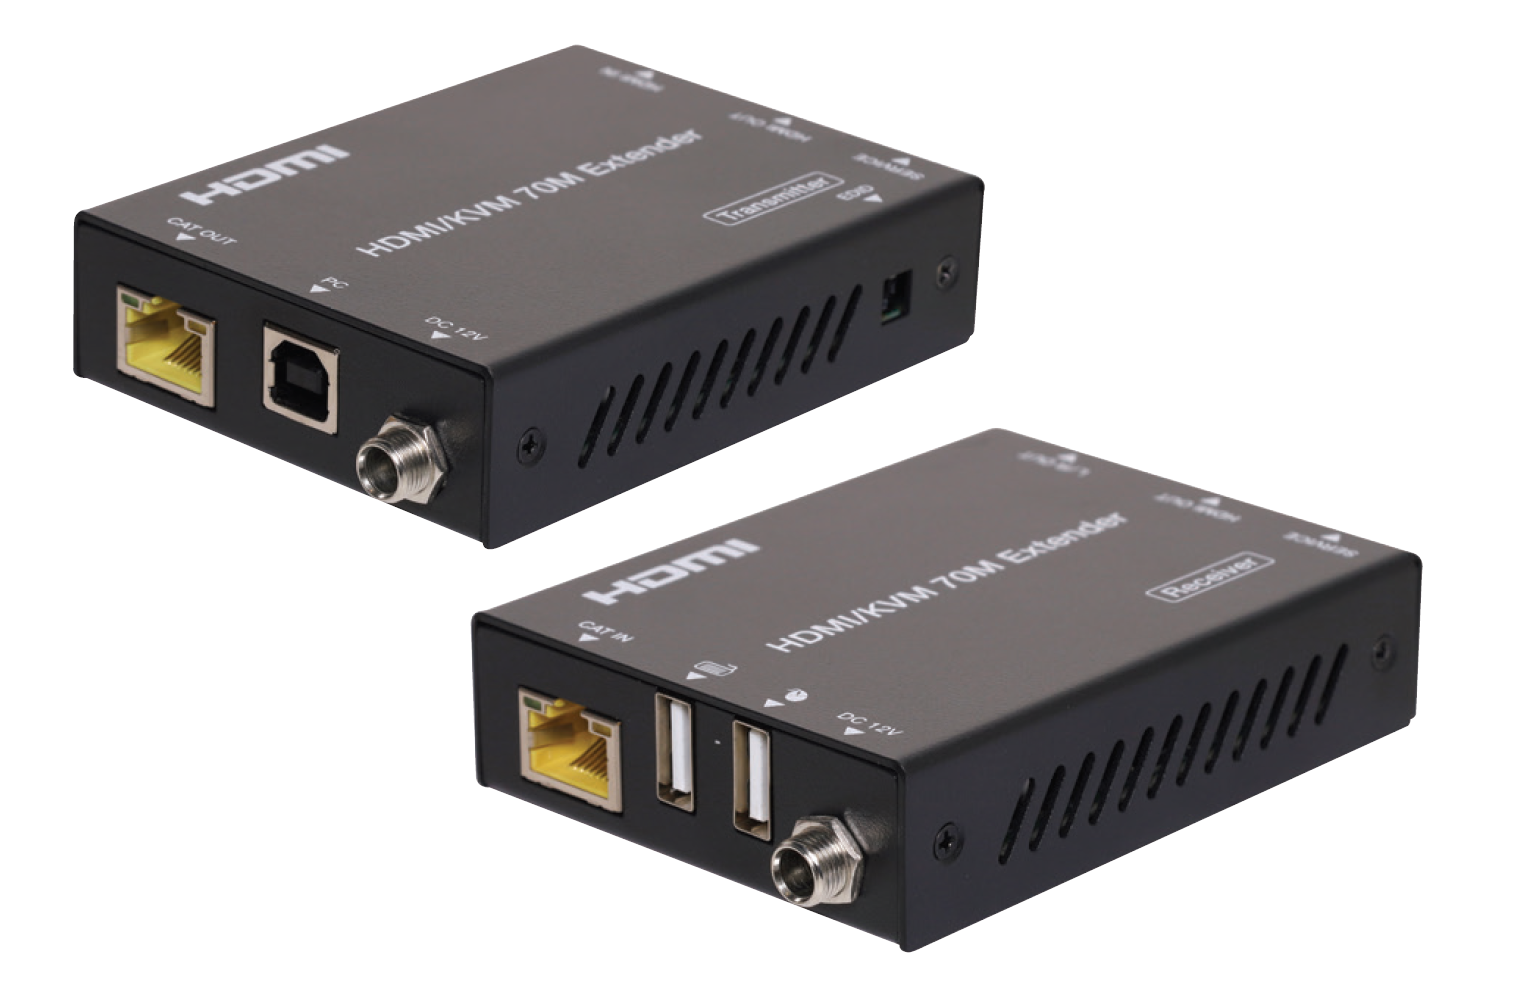 HDMI 2.0b HDCP 2.2 BLACK HDMI EXTENDER WITH USB1.1 KVM INCLUDES RECEIVER & TRANSMITTER 18Gbps UPTO 70M VIA SINGLE CAT6/6A SUPPORT UPTO 4K2K@60Hz